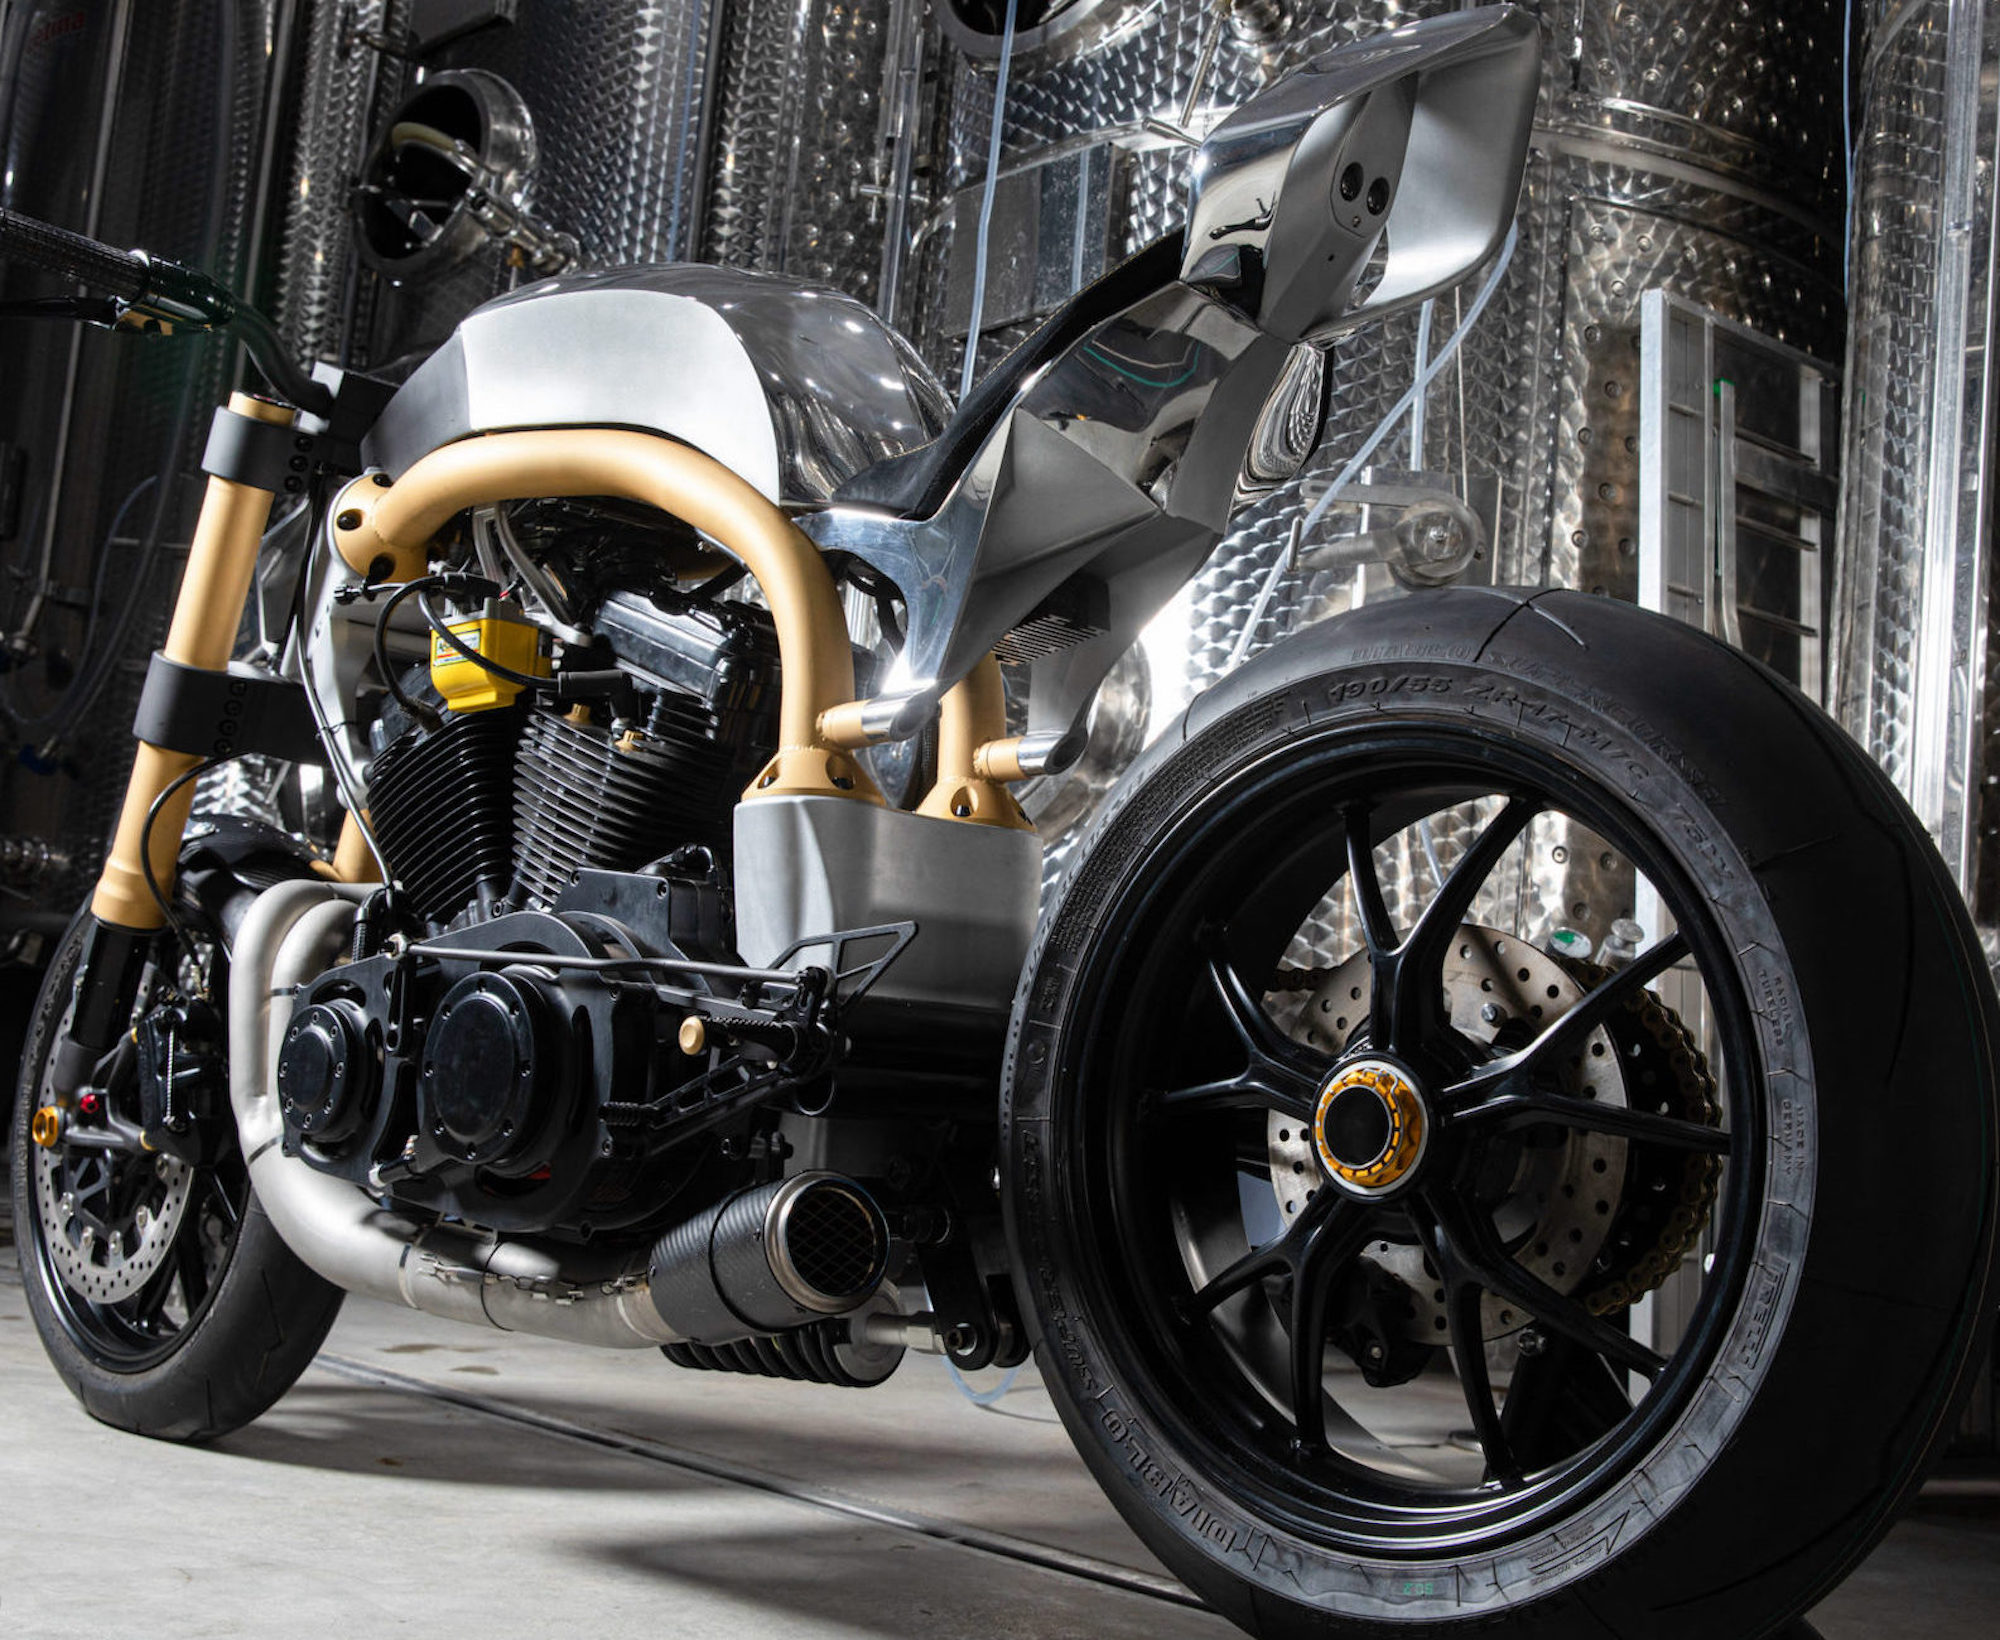 A chromed out custom Buell S1, courtesy of the team at RD Customs - specifically Messina and Michel.